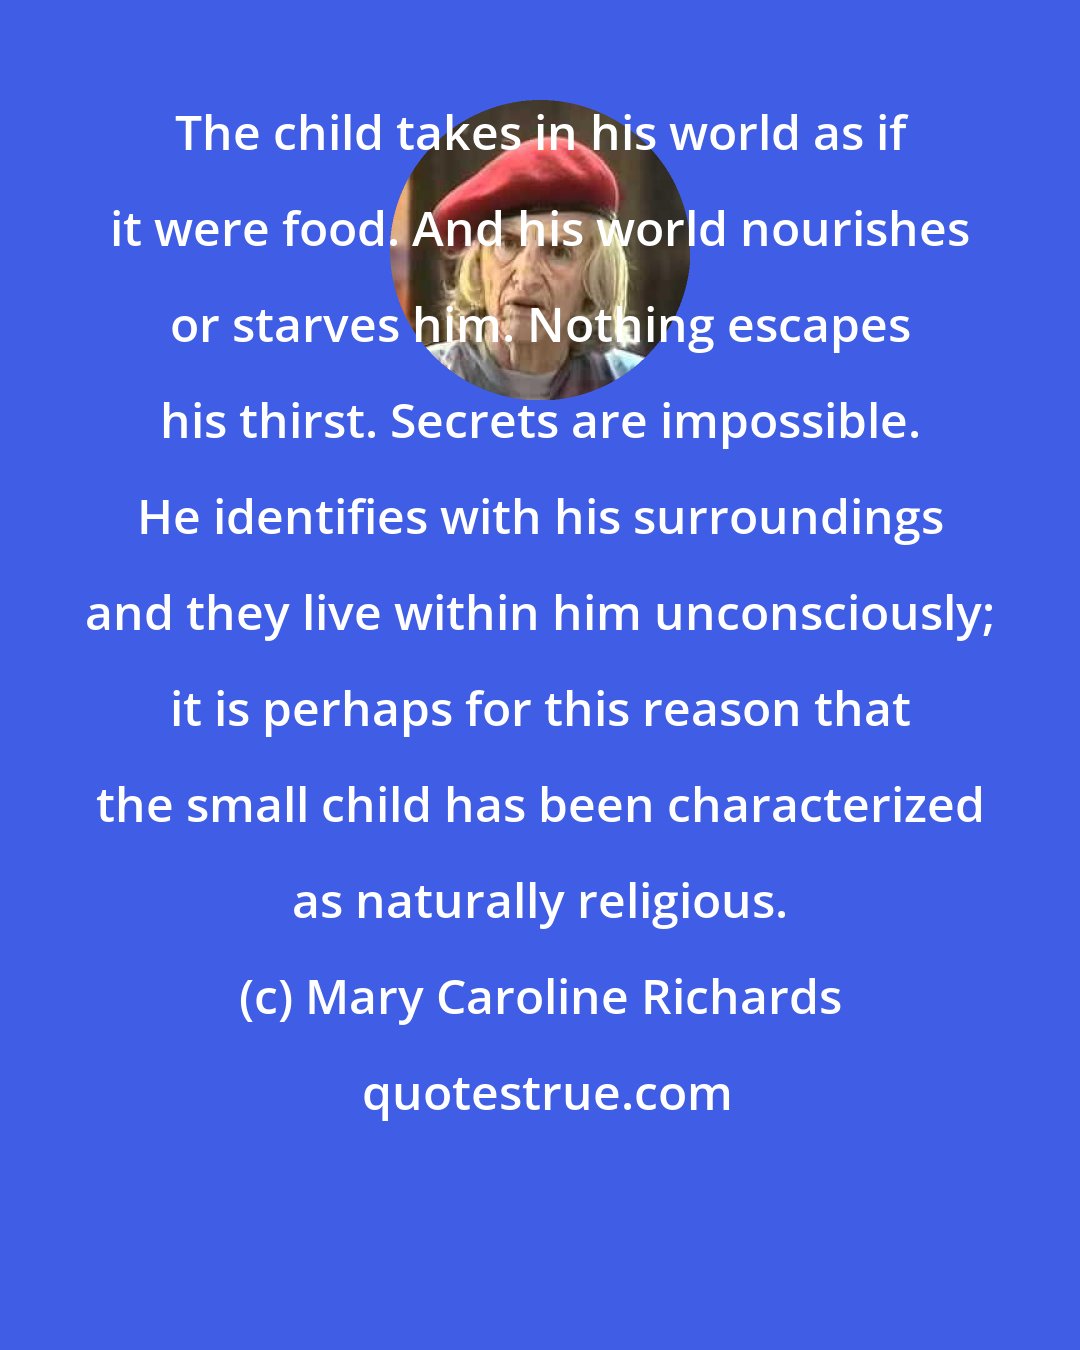 Mary Caroline Richards: The child takes in his world as if it were food. And his world nourishes or starves him. Nothing escapes his thirst. Secrets are impossible. He identifies with his surroundings and they live within him unconsciously; it is perhaps for this reason that the small child has been characterized as naturally religious.